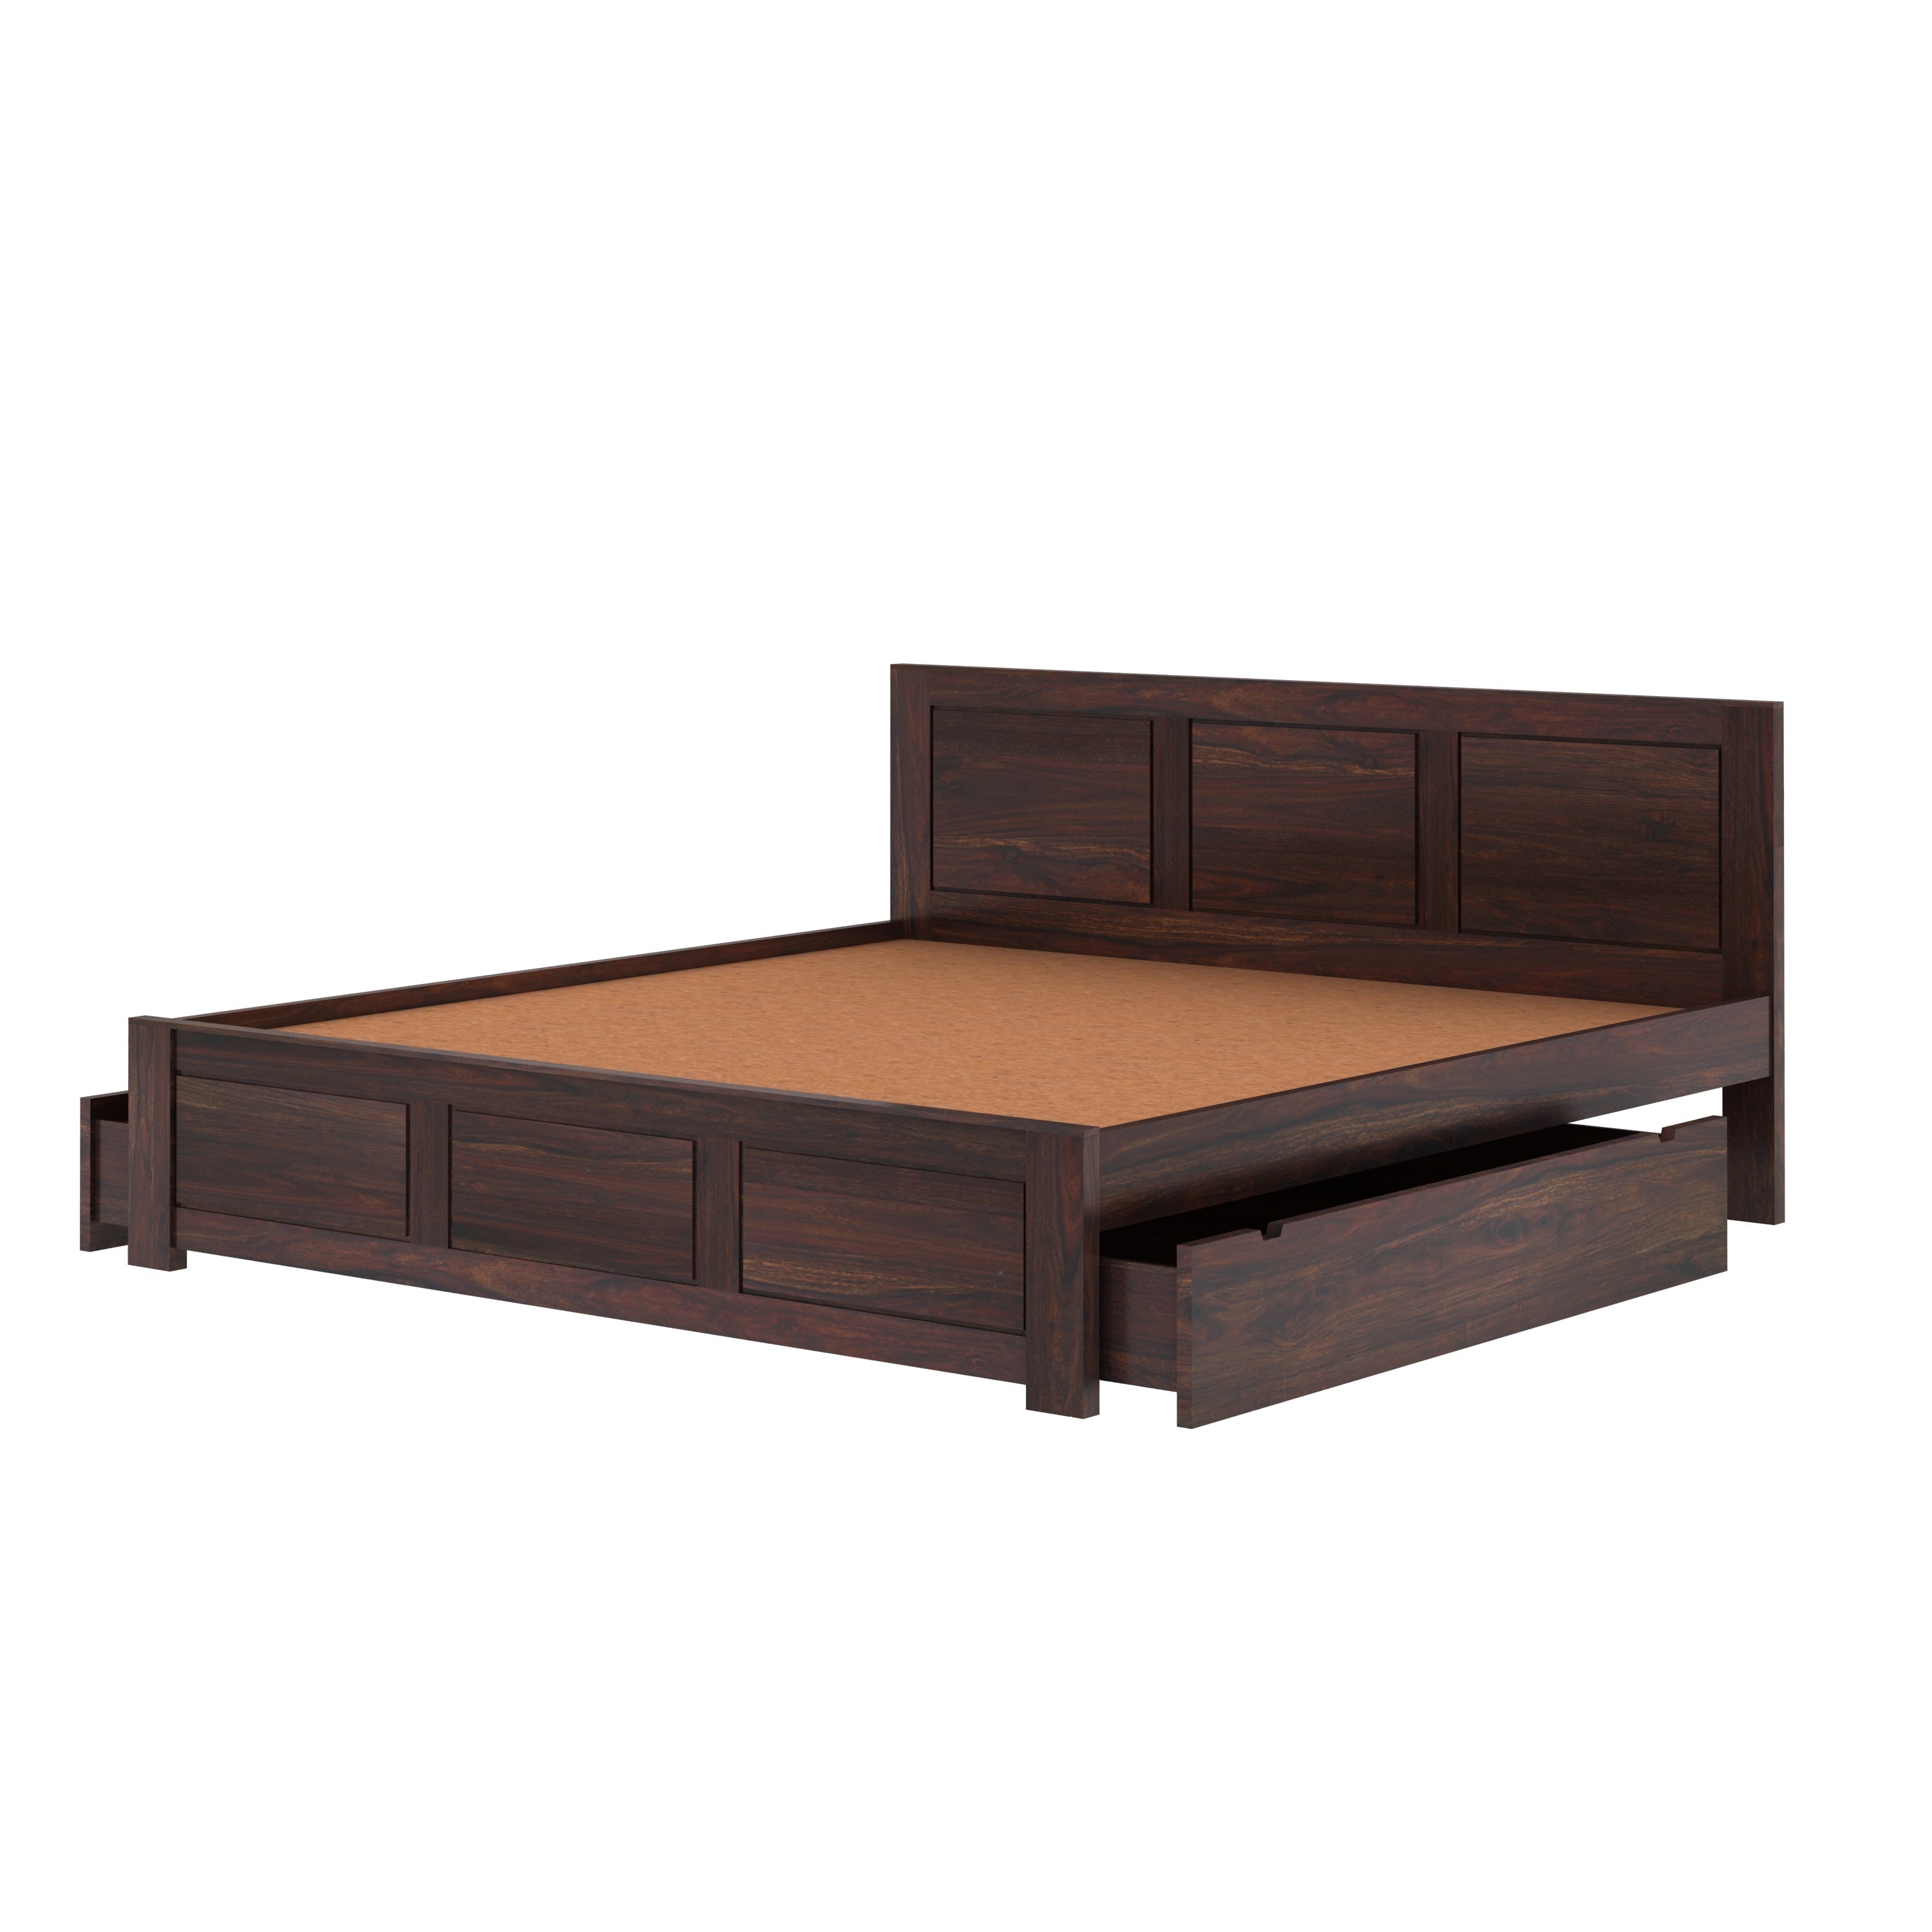 Woodwing Solid Sheesham Wood Bed With Two Drawers (King Size, Walnut Finish)